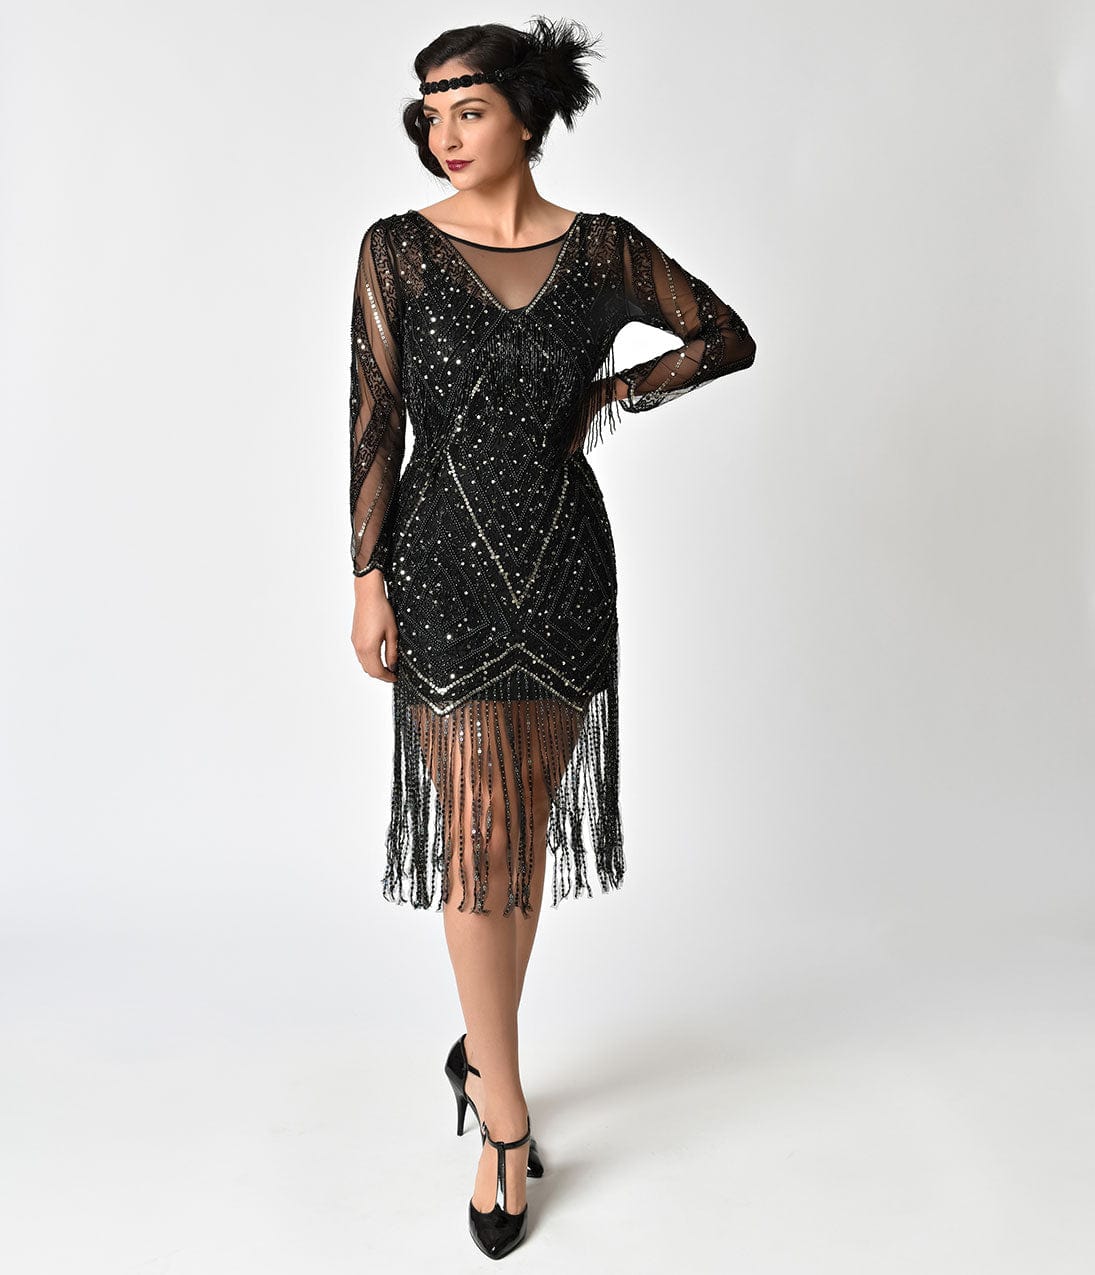 Where to Buy 1920s Dresses- Vintage, Repro, Inspired Styles Online